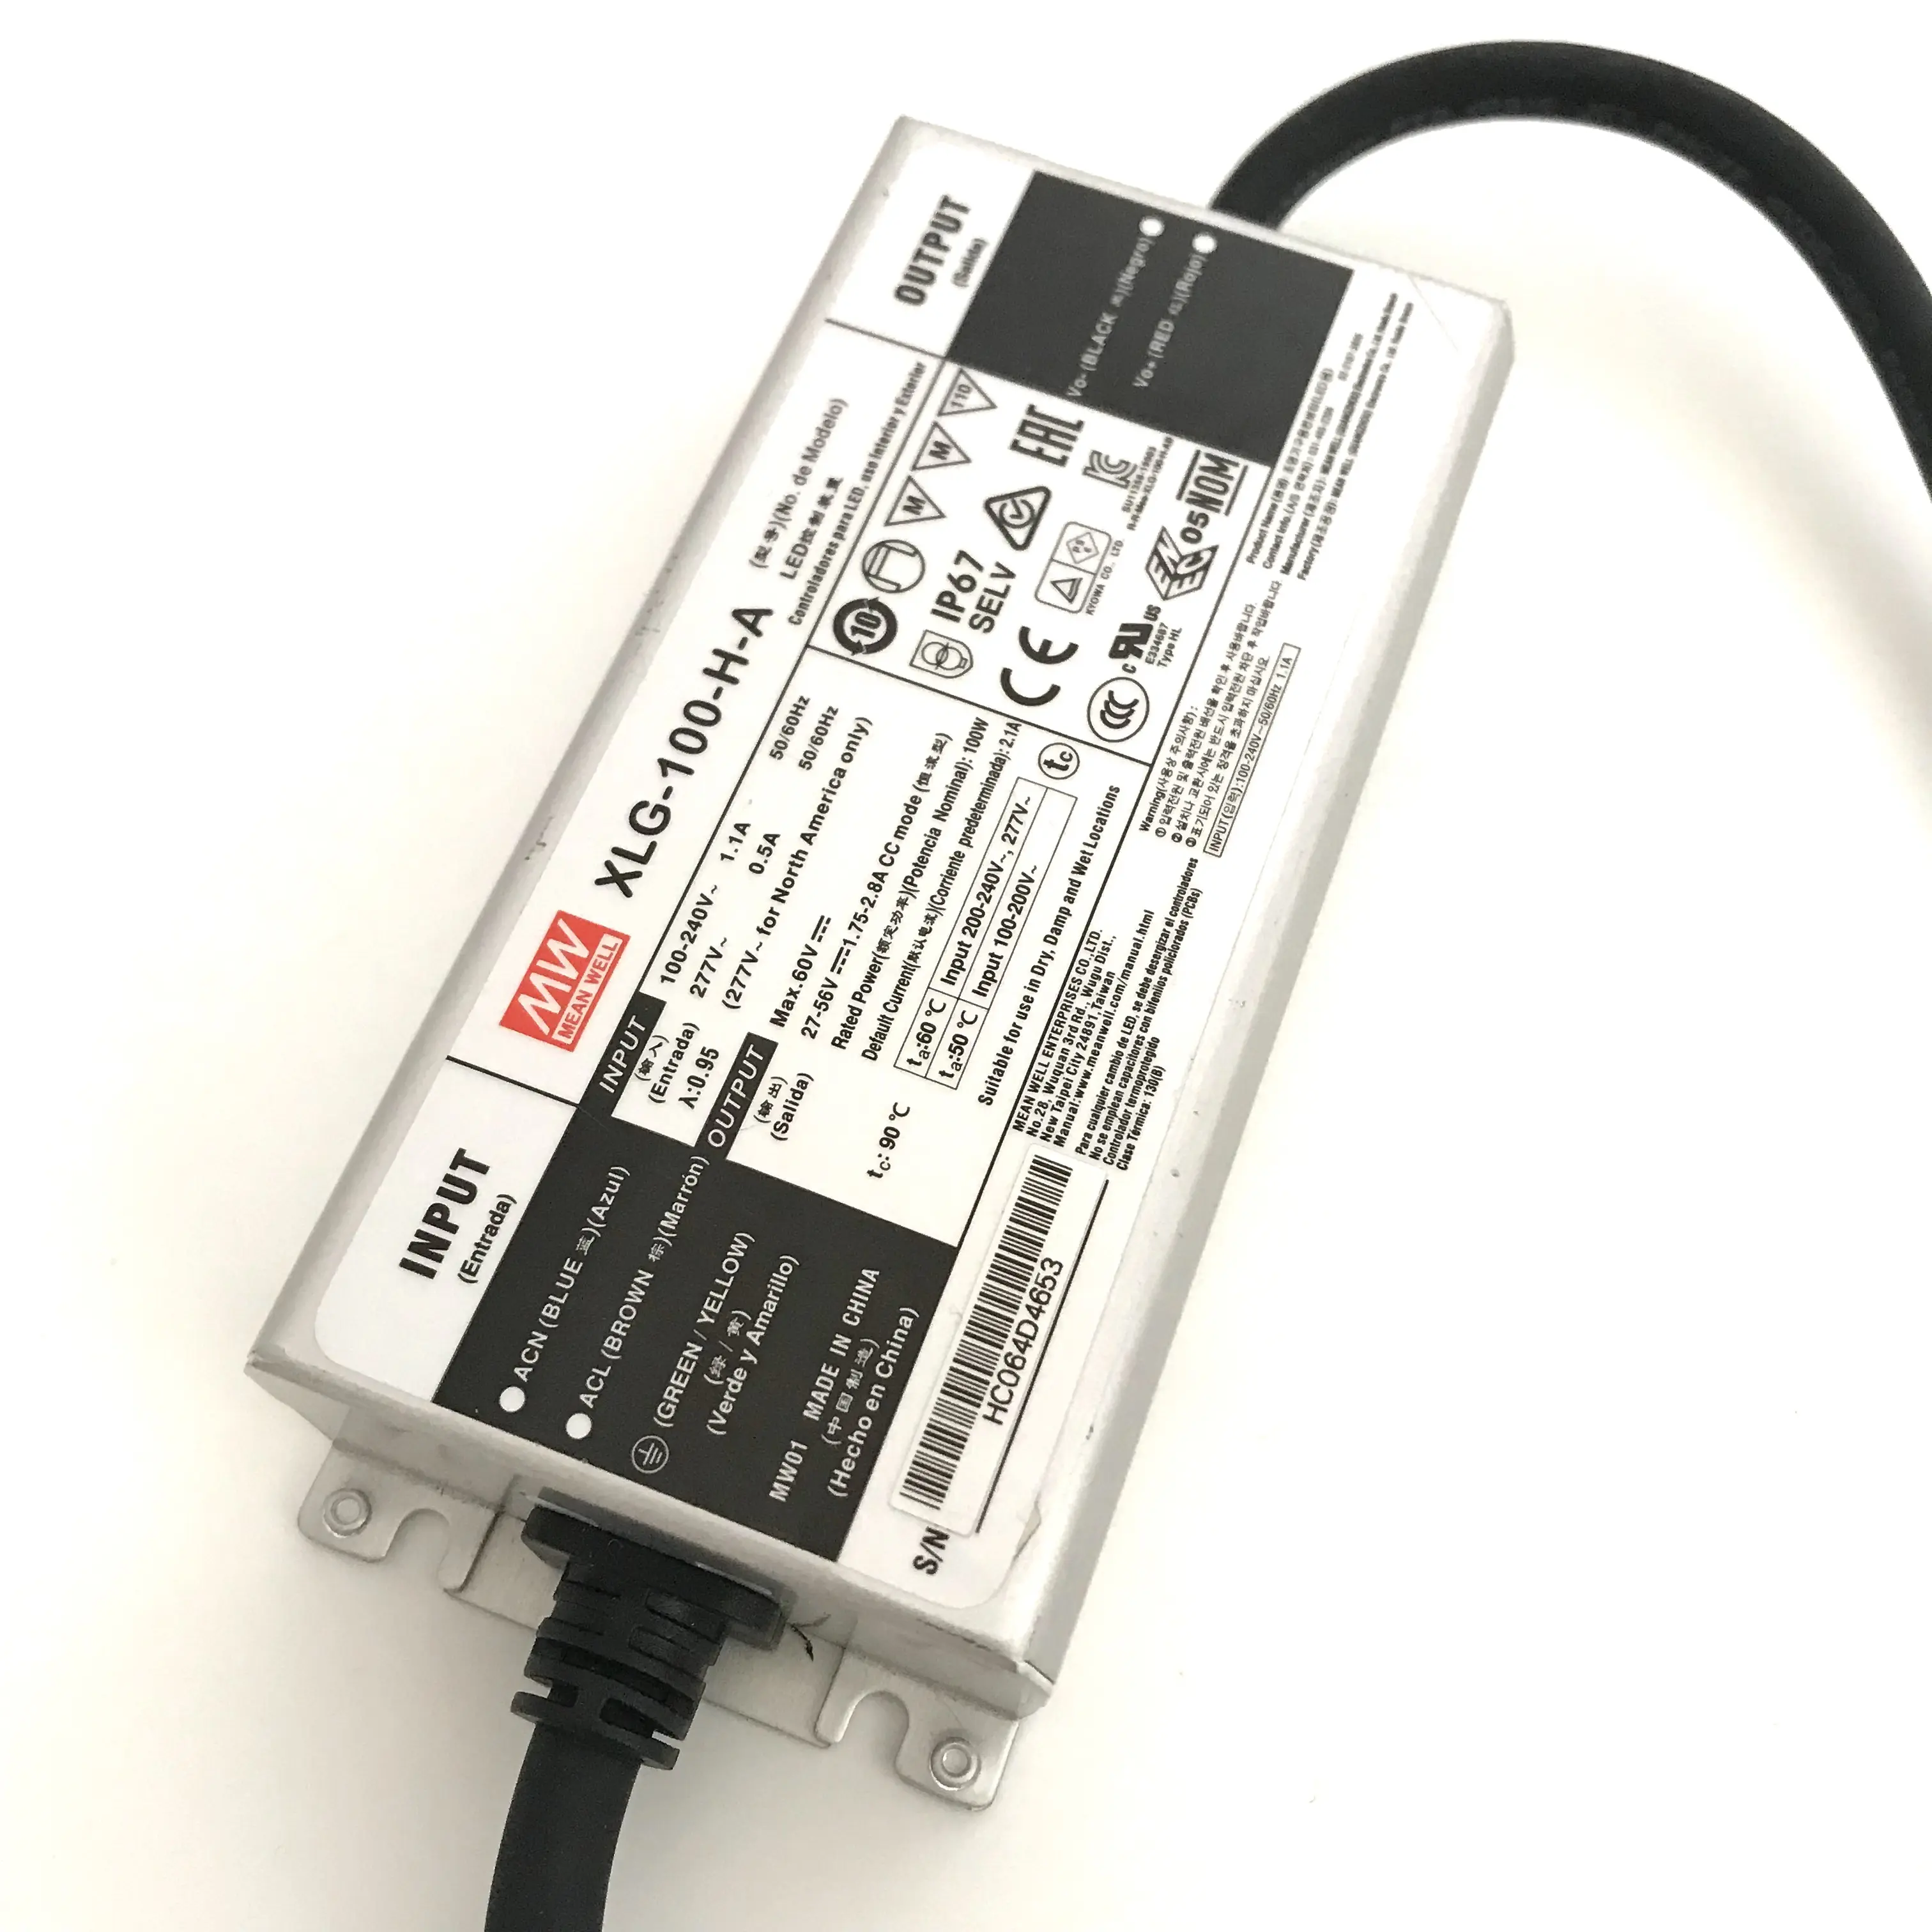 MEAN WELL XLG-100-H-A 100w Constant Current 36V 48V Led Driver